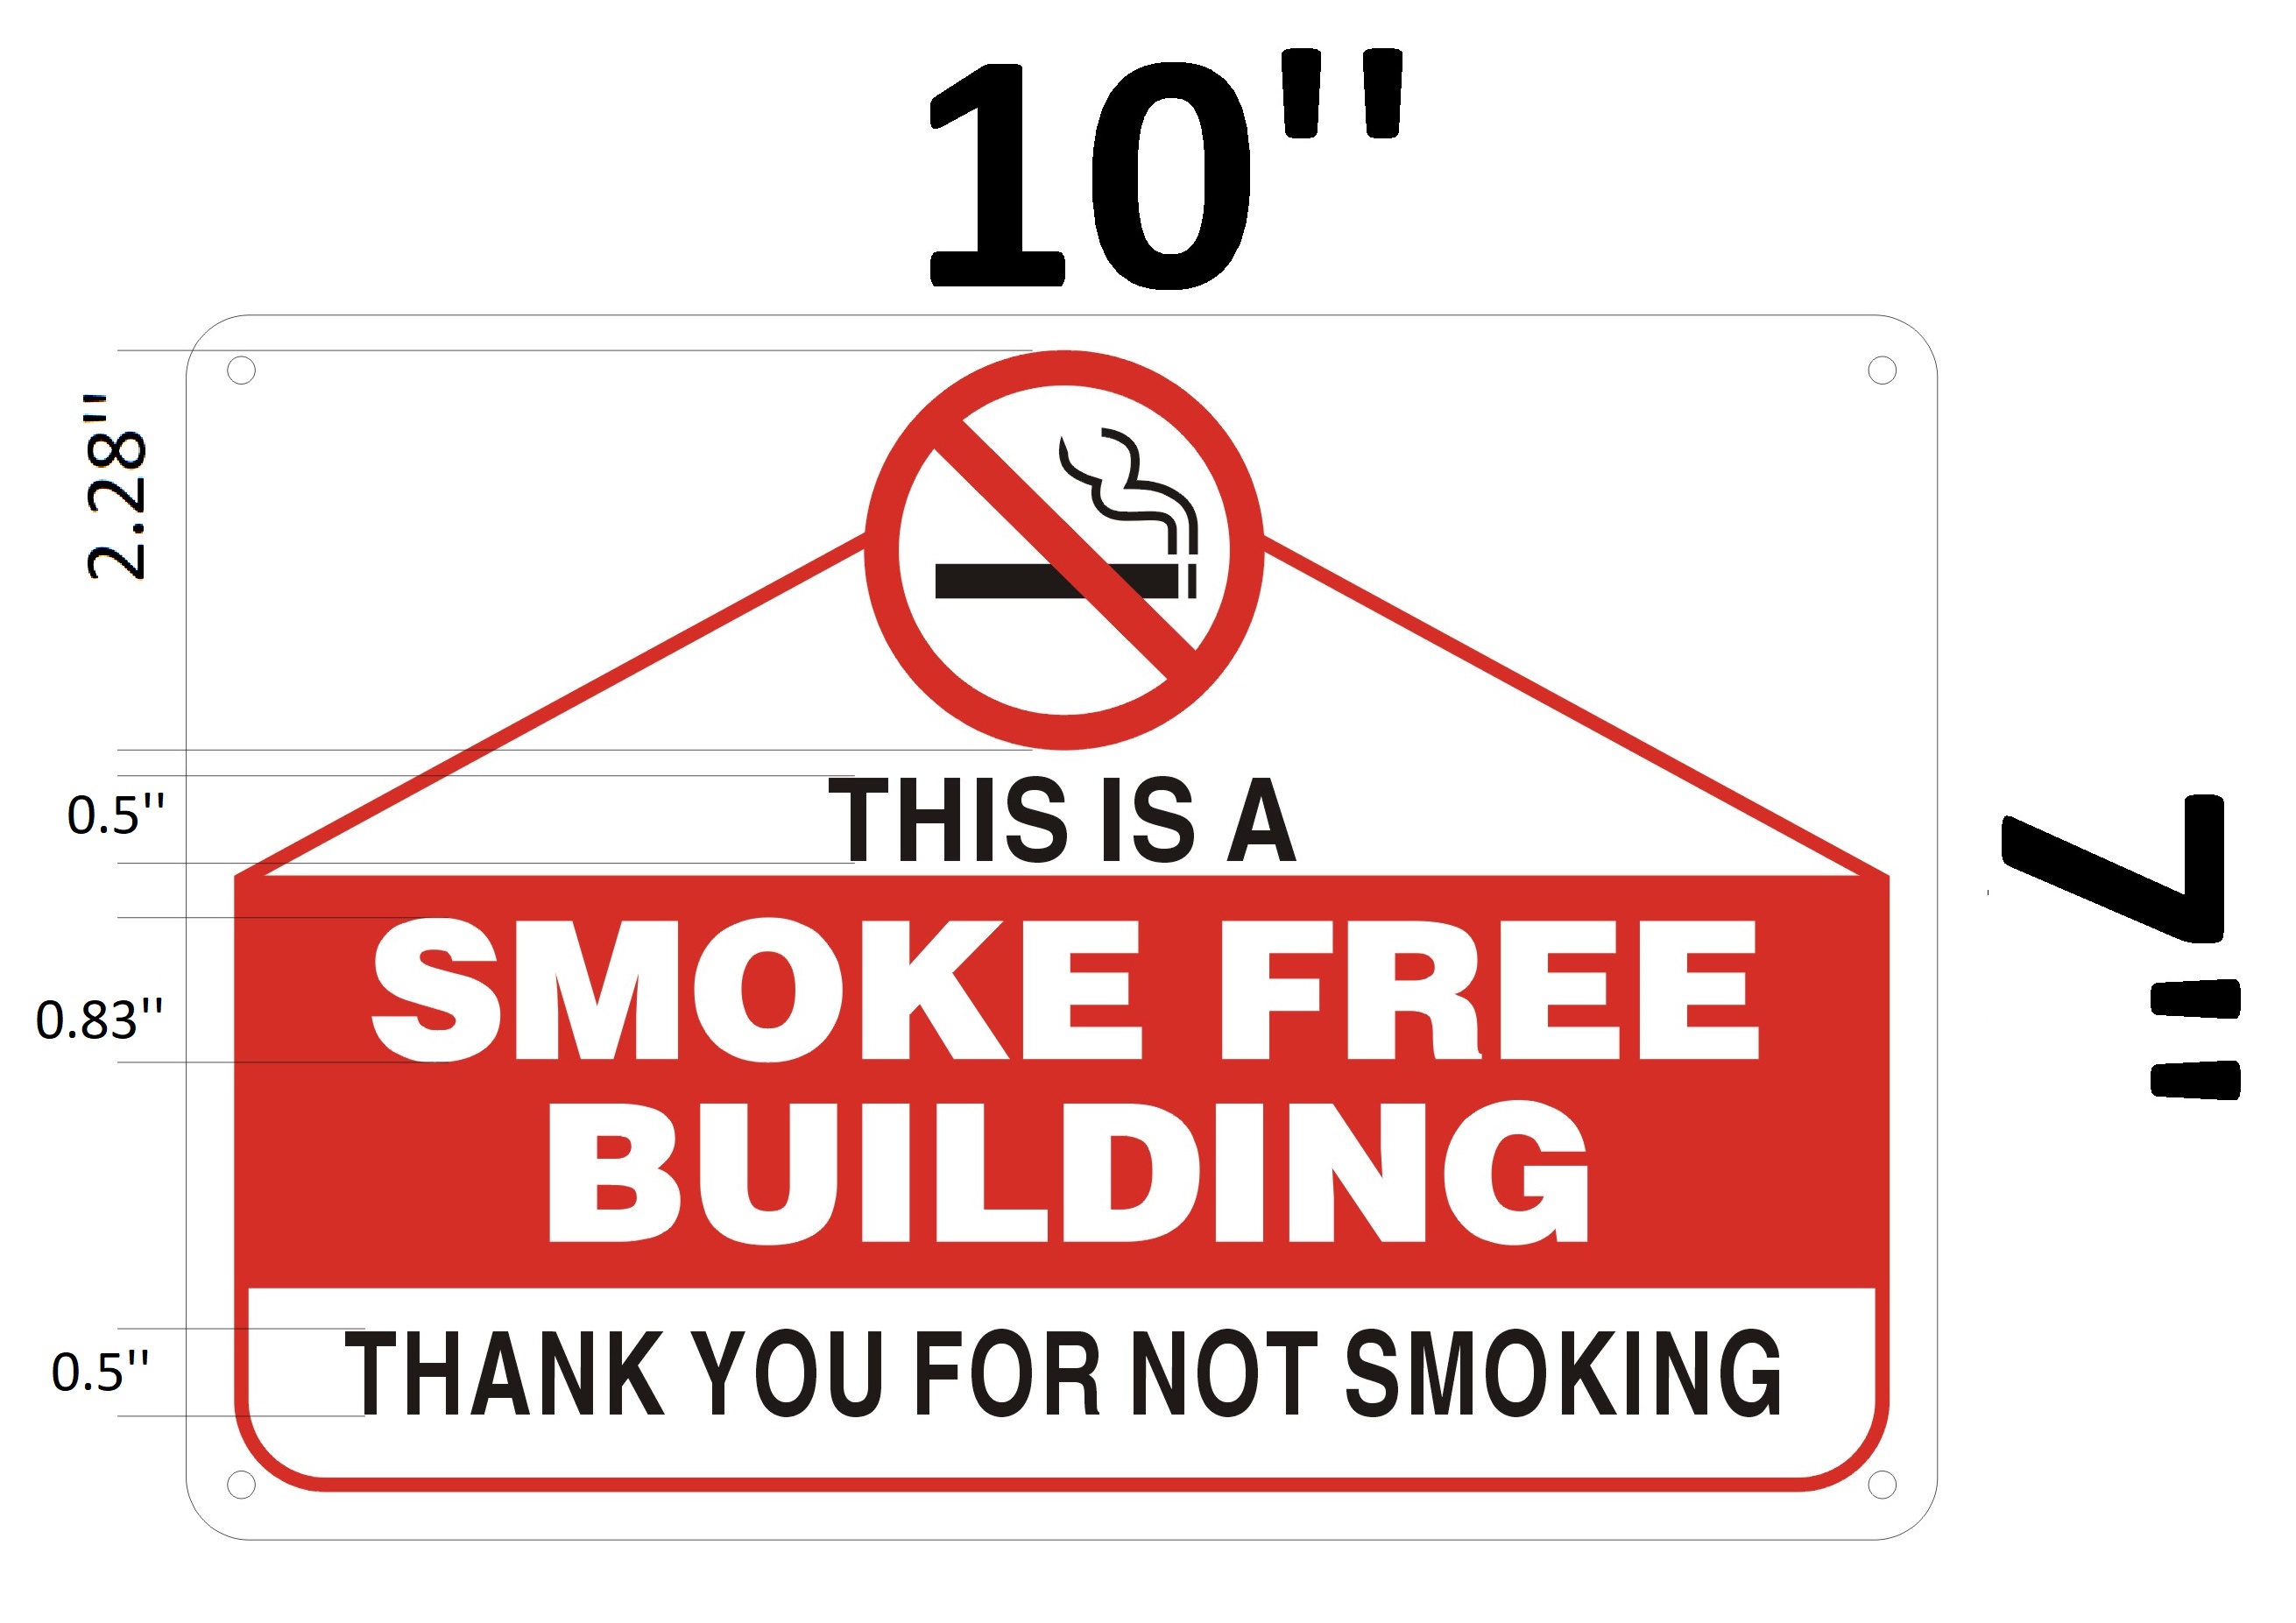 Property is not allowed. No smoking building. No smoking sign. Thank you for no smoking.